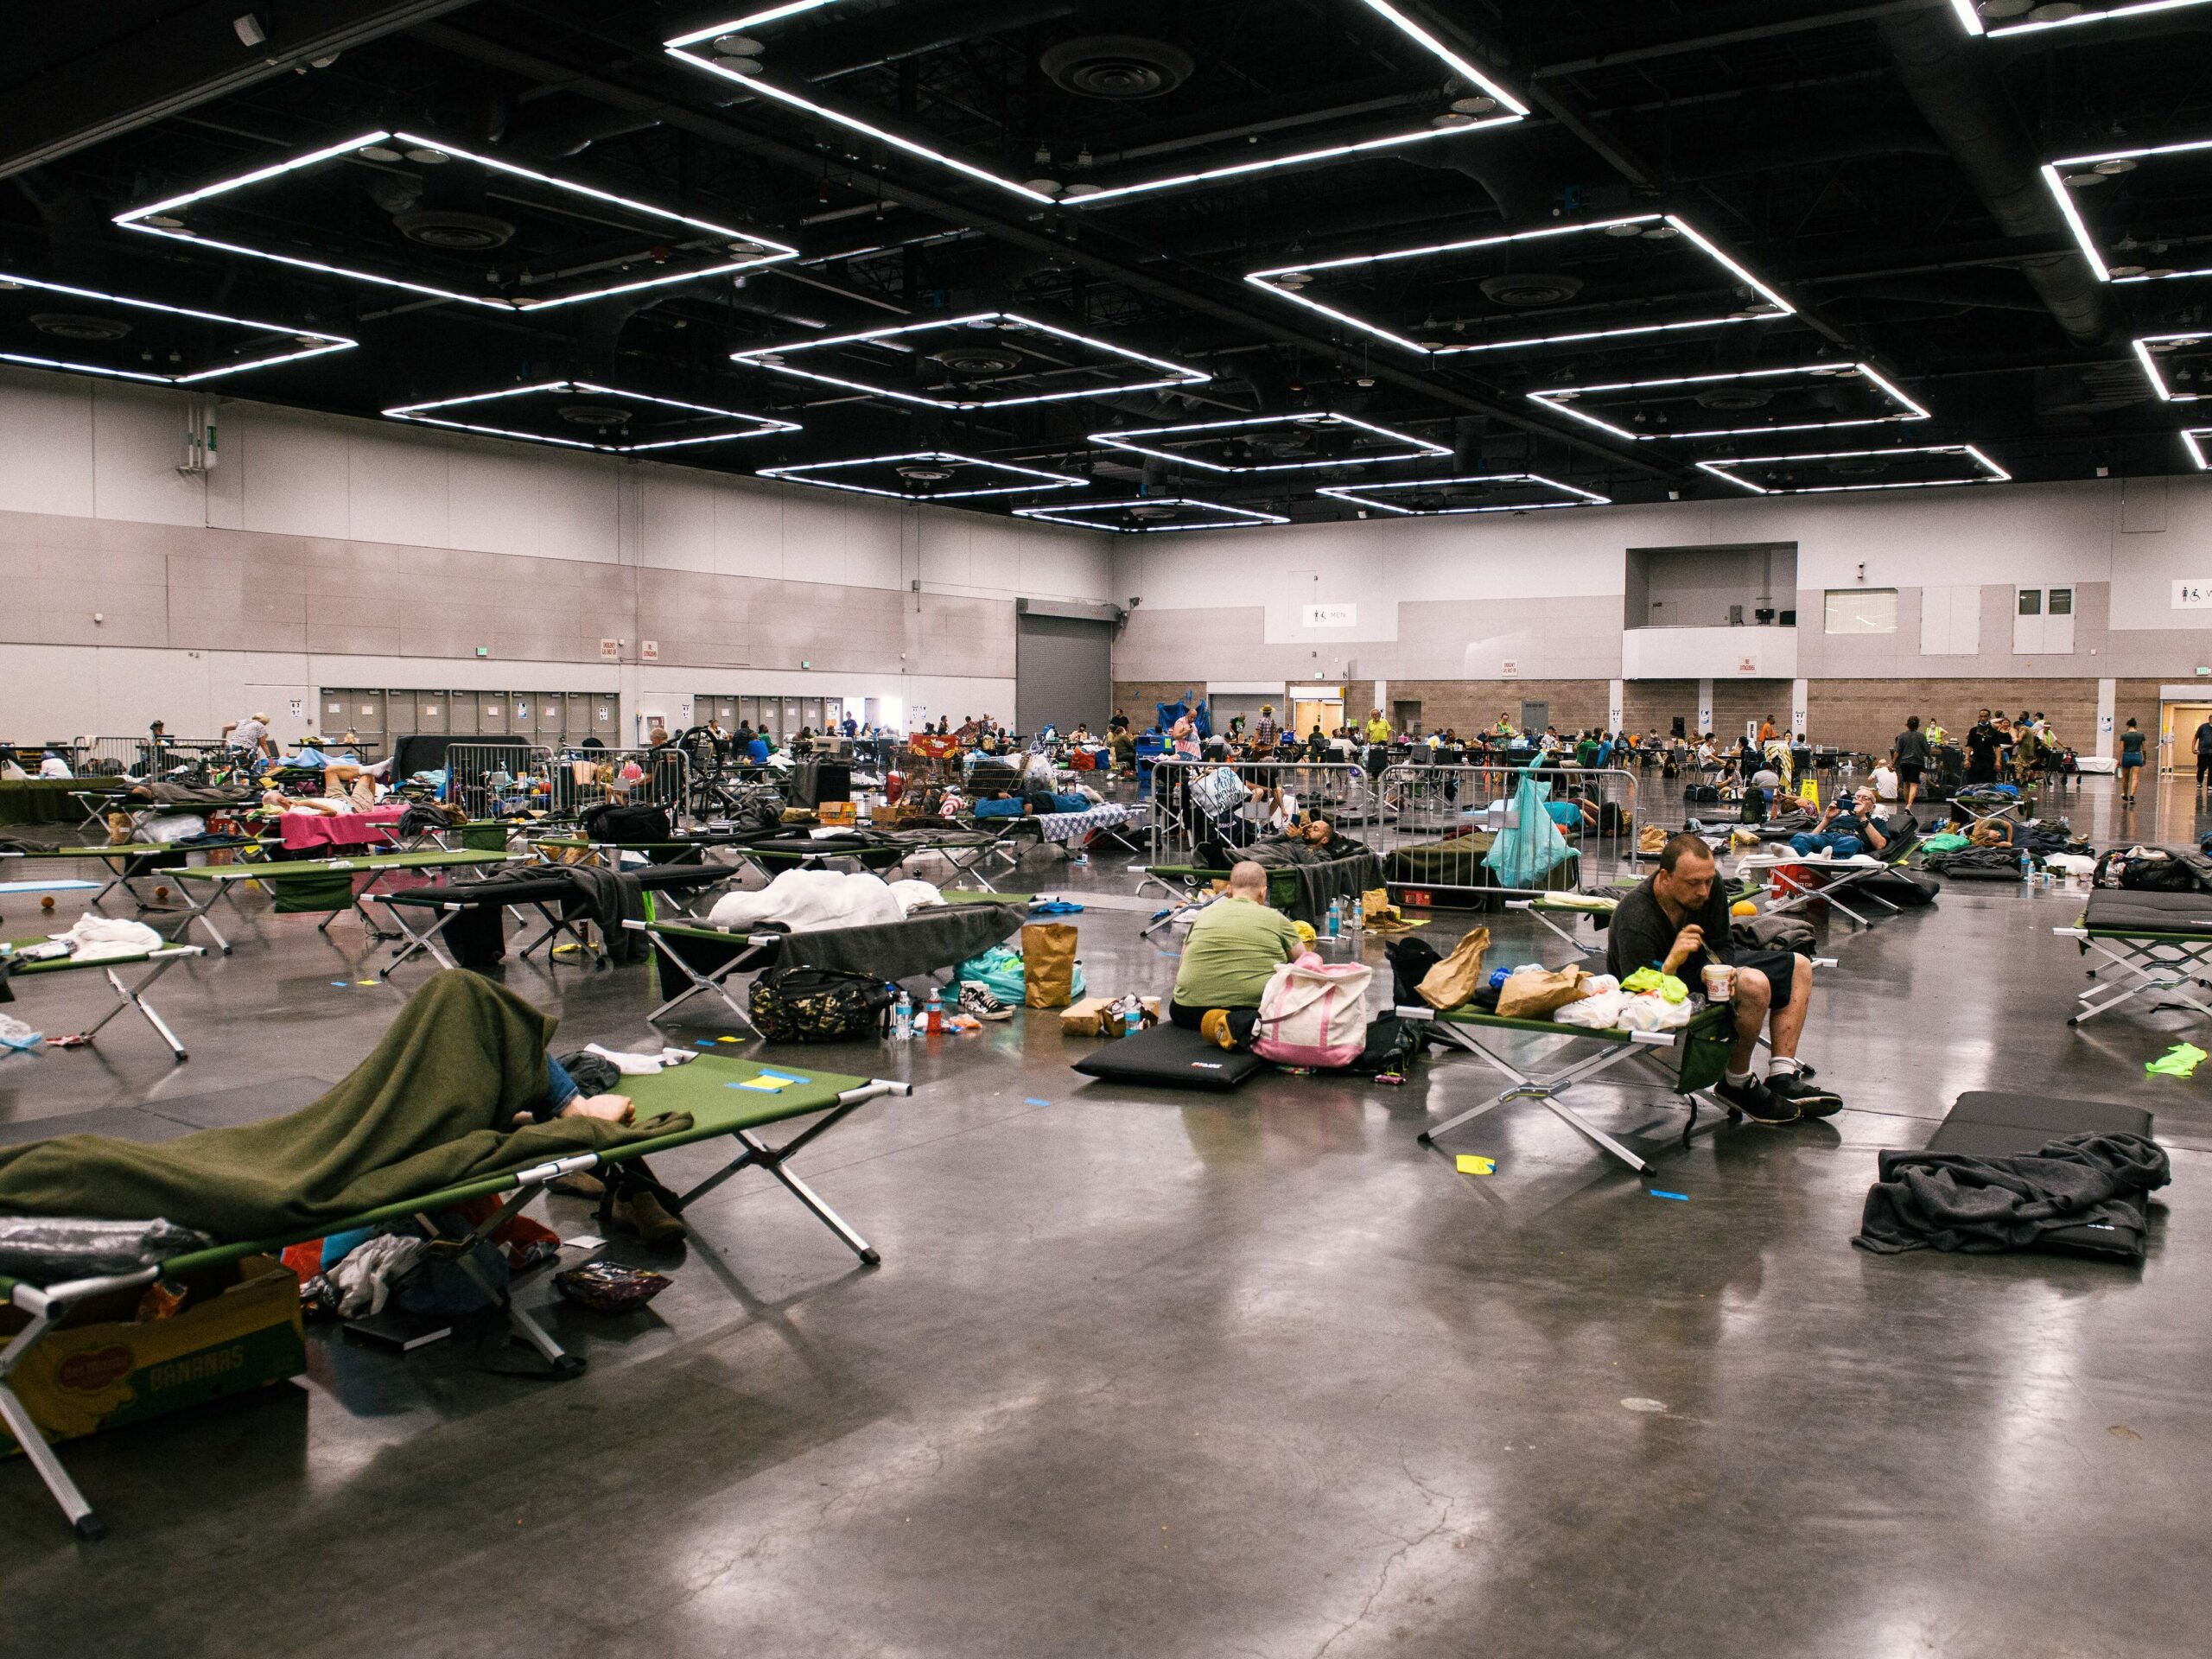 People rest at a cooling station in Portland, Oregon during the deadly Northwest heat dome of 2021. Climate change has made heat risks more dangerous across the country. A new heat forecasting tool could help people stay safe.